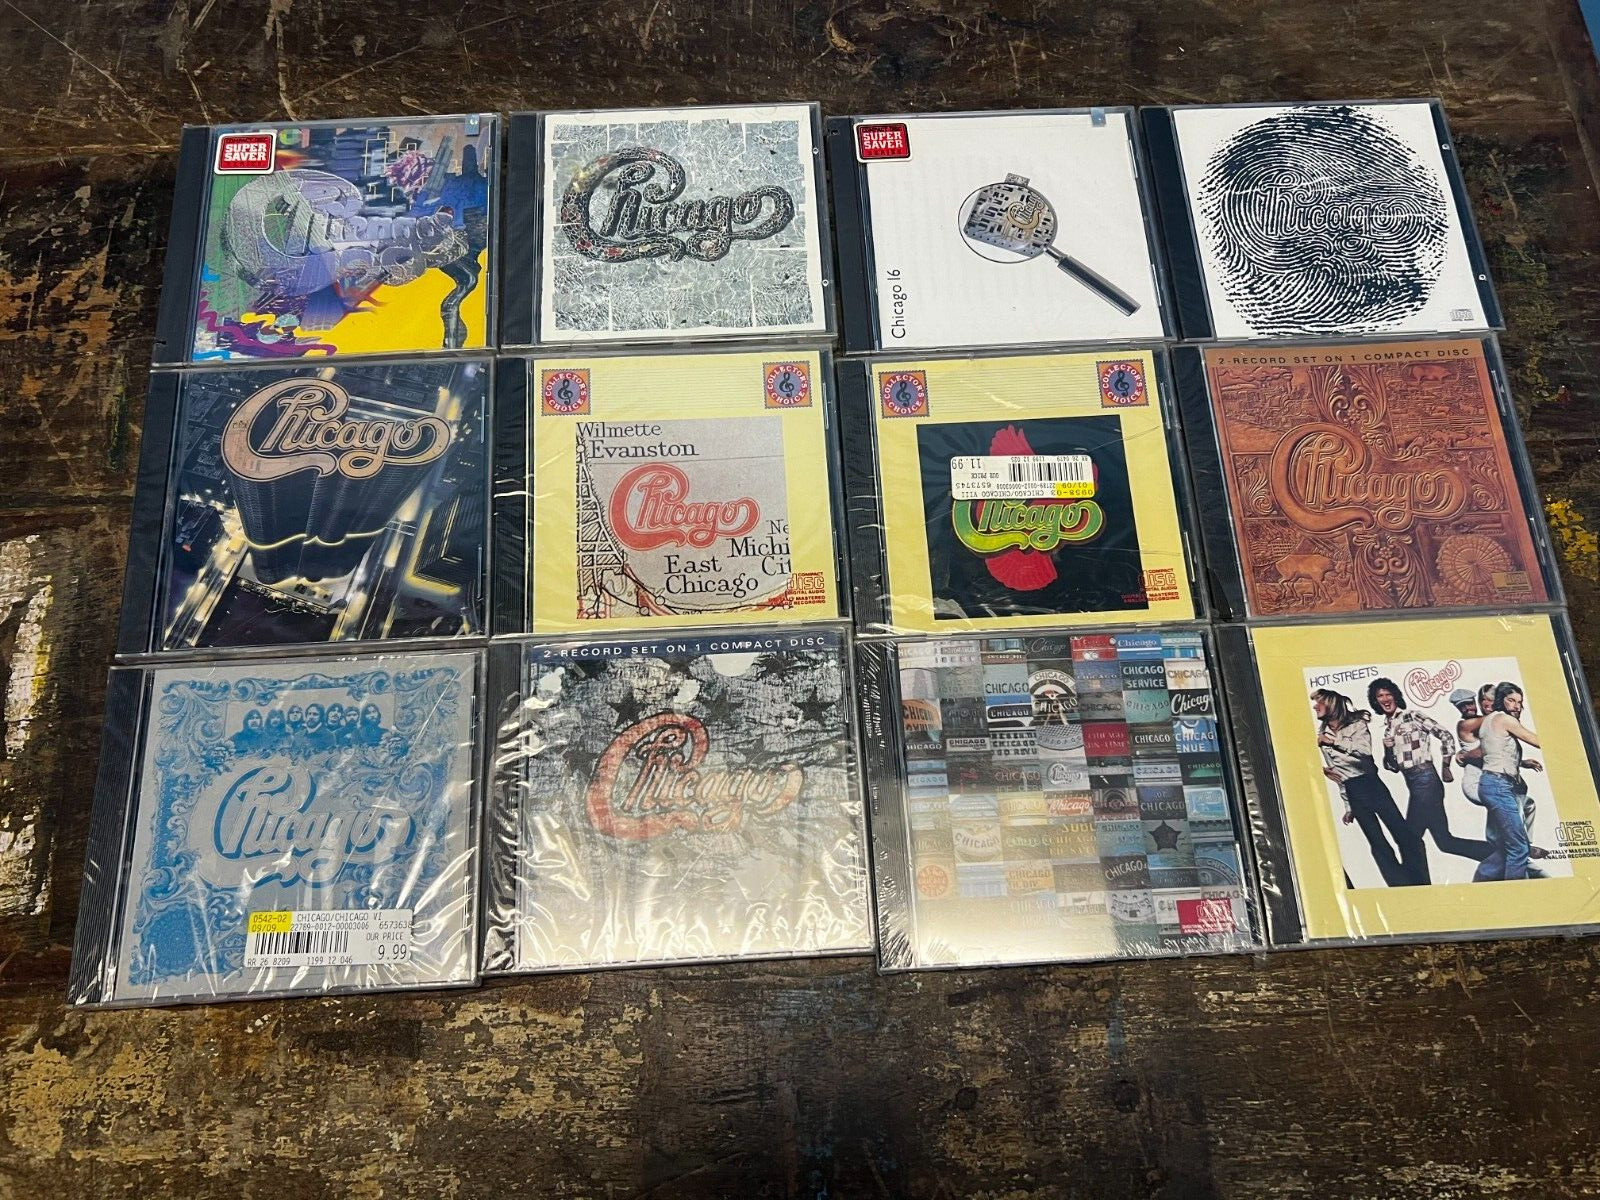 Lot of 12 NEW SEALED Chicago CDs (Hot Streets, III, VI, VII, VIII, XI, 13...)